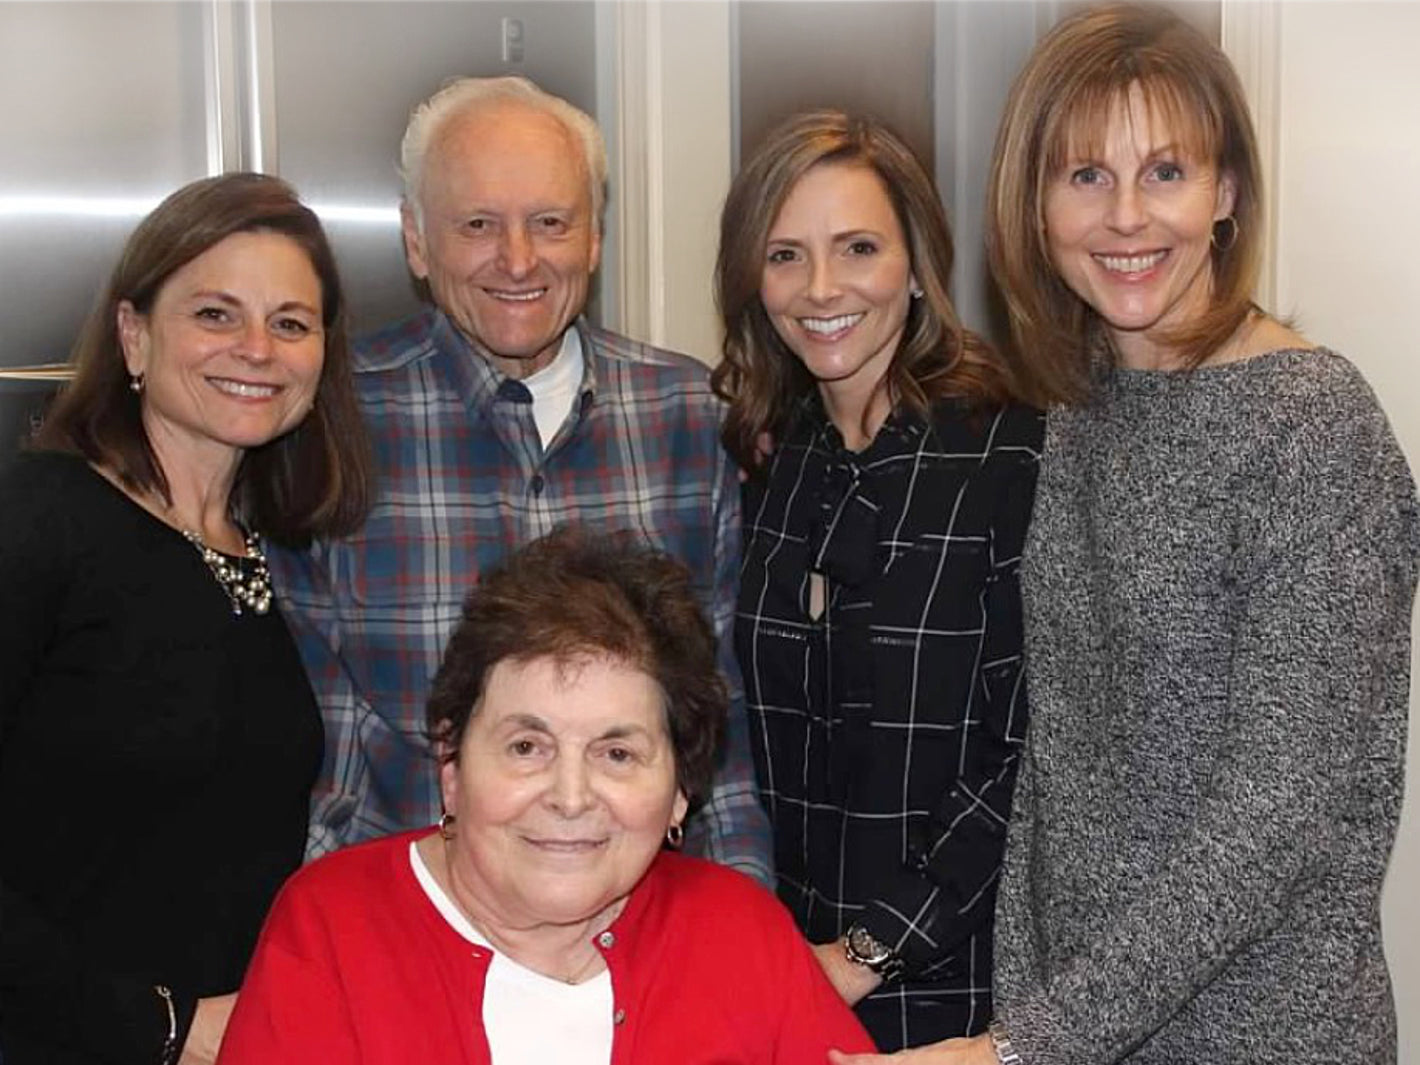 Sorelle Biscotti LLC owners, Janine, Christina and Gina with mother and father